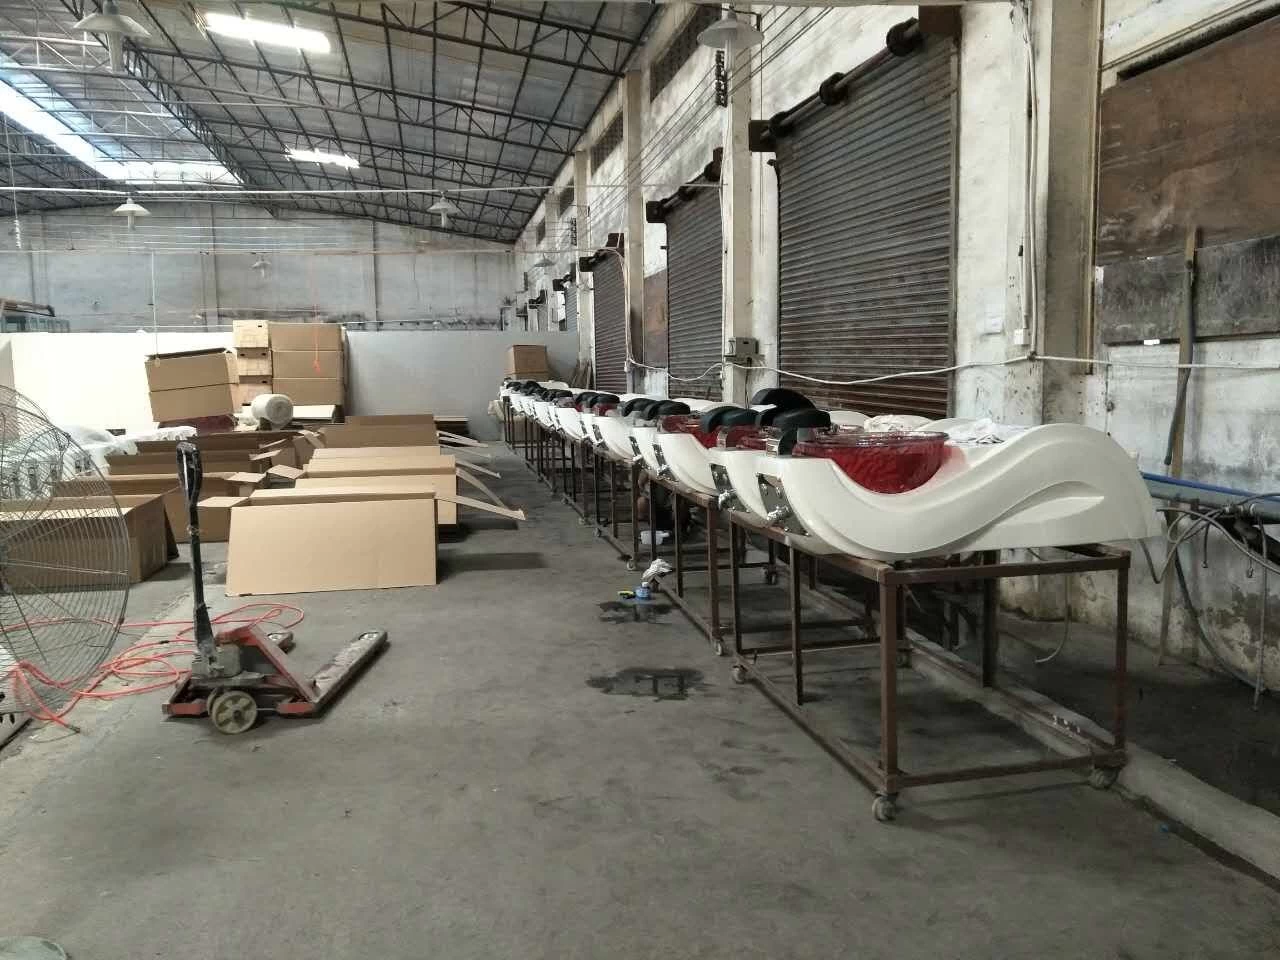 doshower pedicure chair factory china